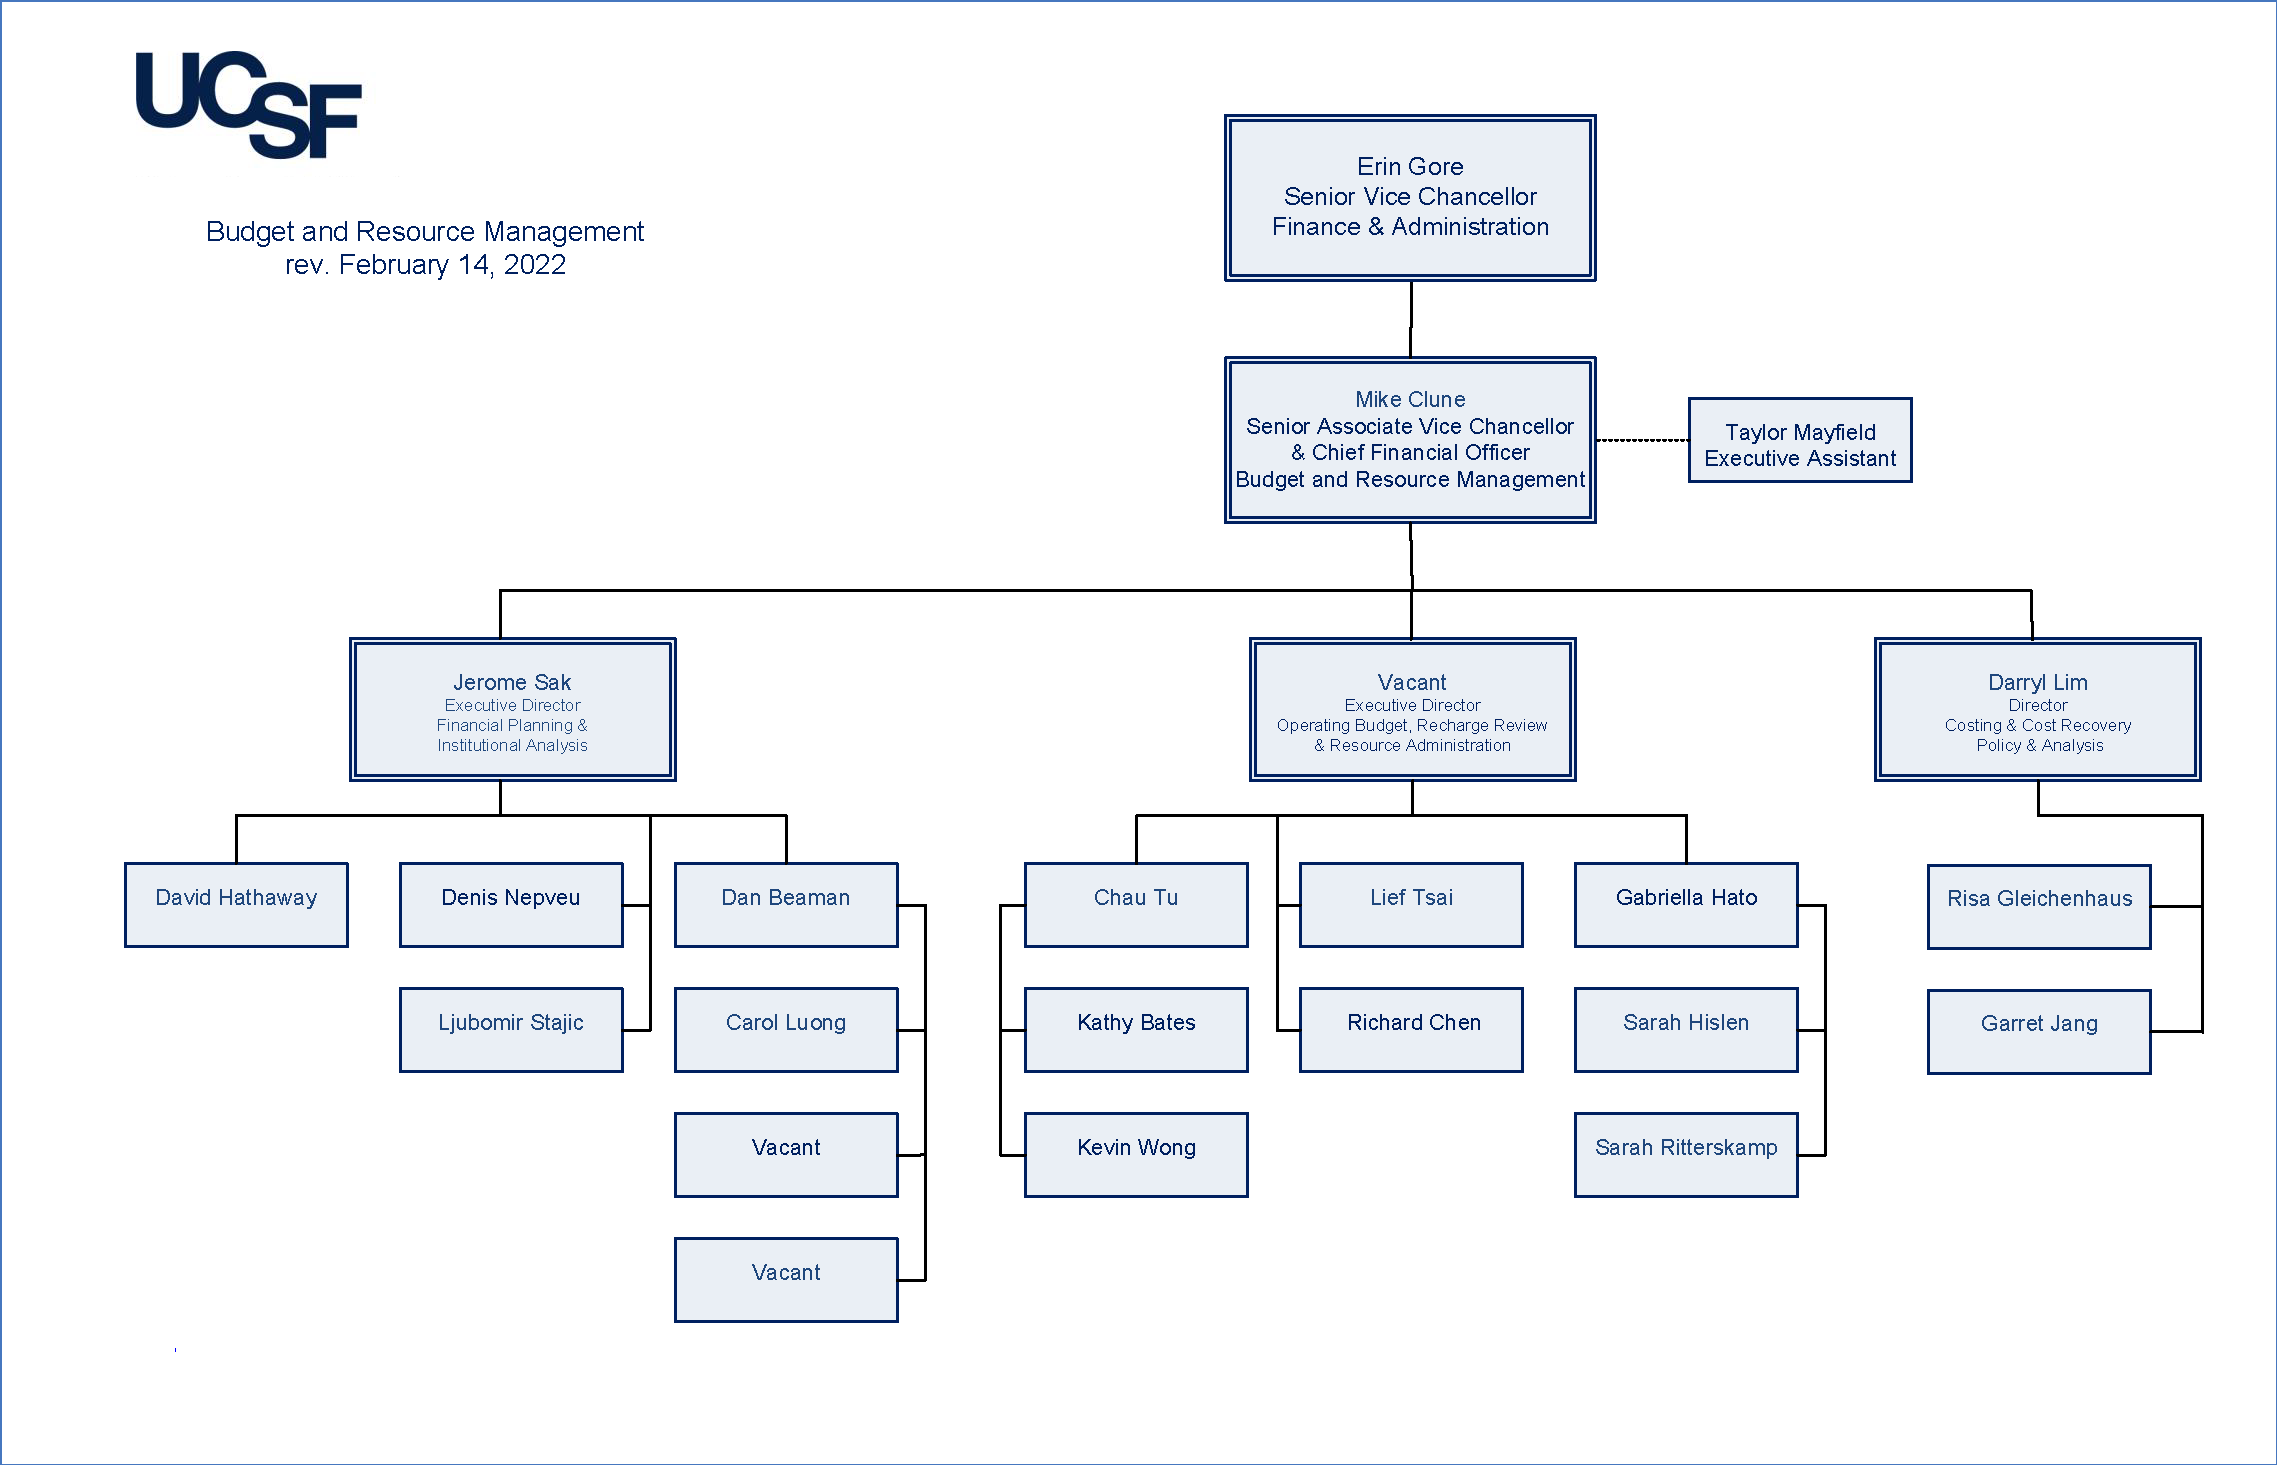 Organization chart for the UCSF Budget office.